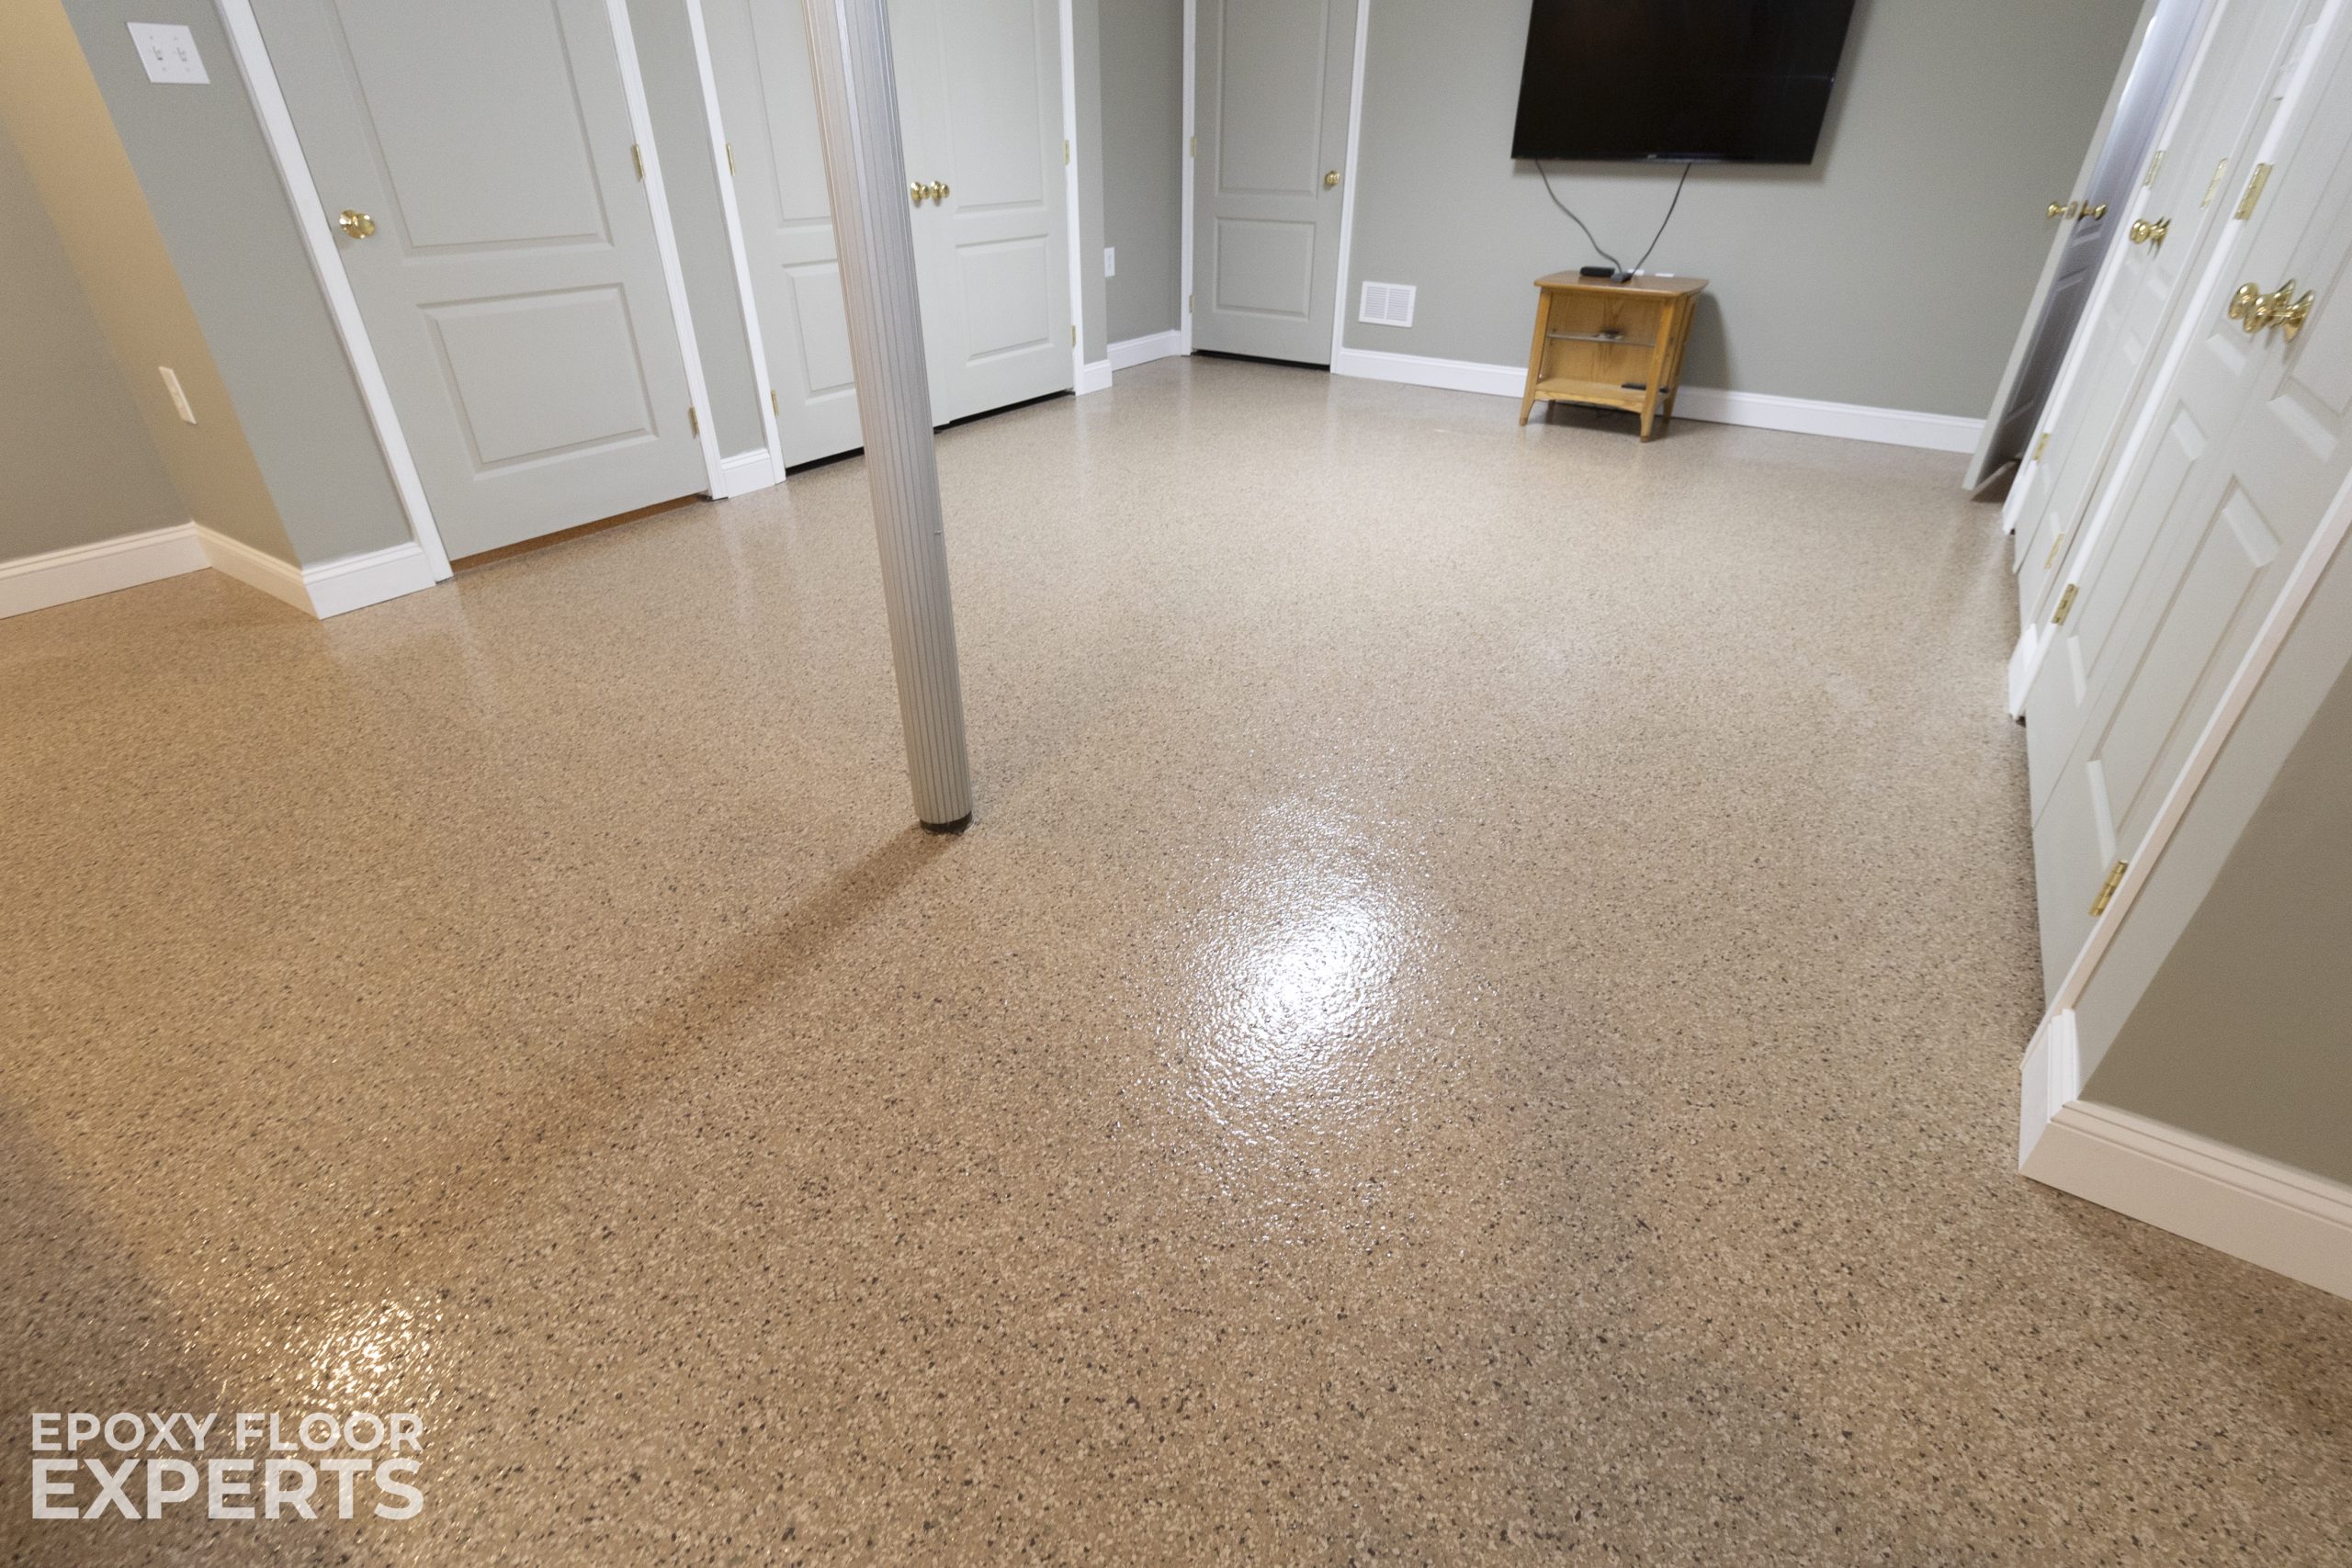 Flake epoxy flooring low maintenance and affordable for basement flooring